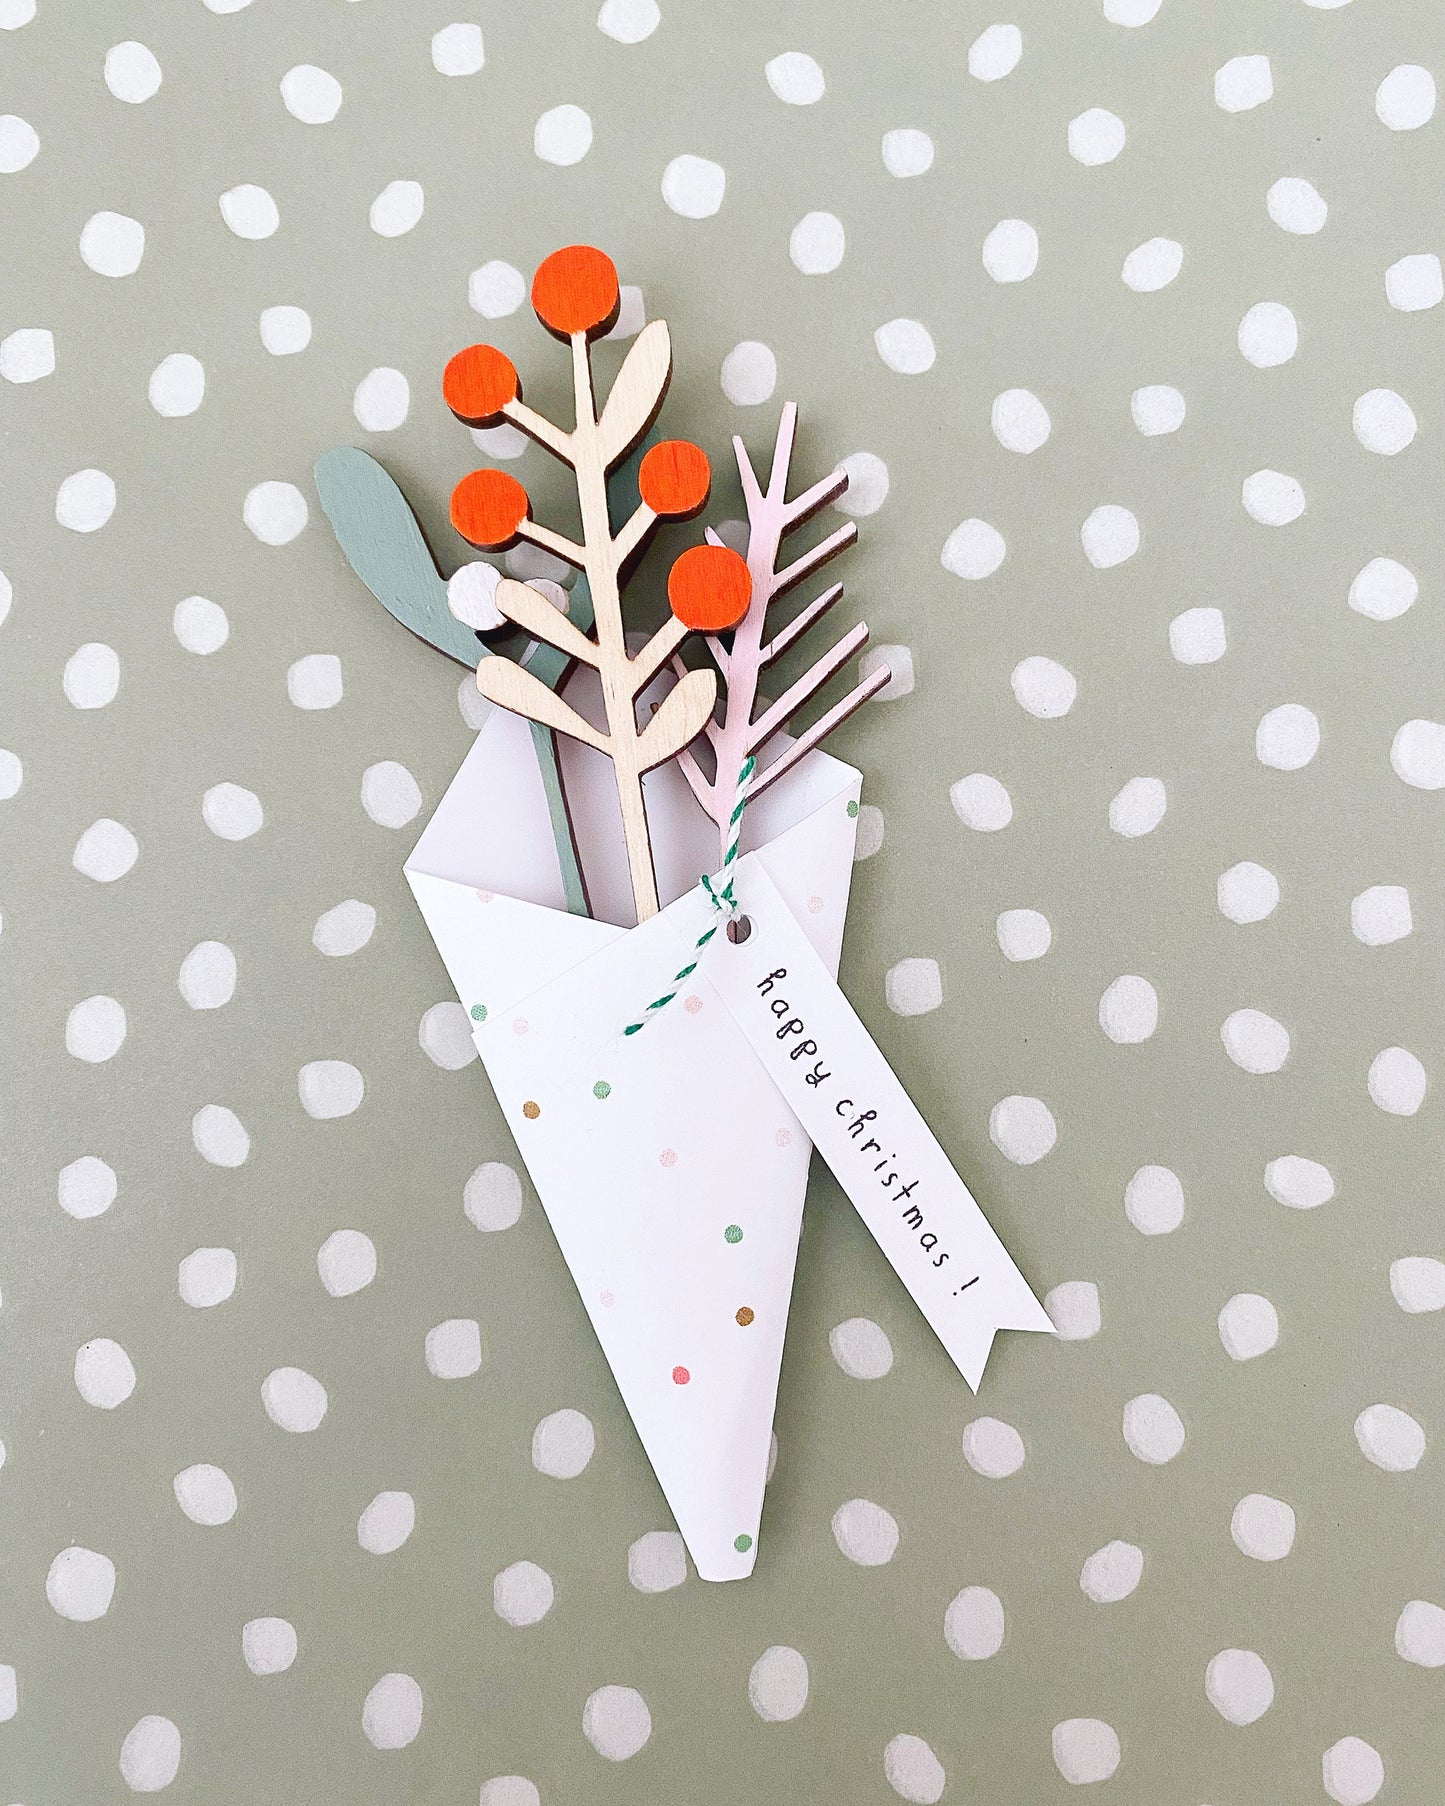 Mini wooden hand-painted christmas foliage stems